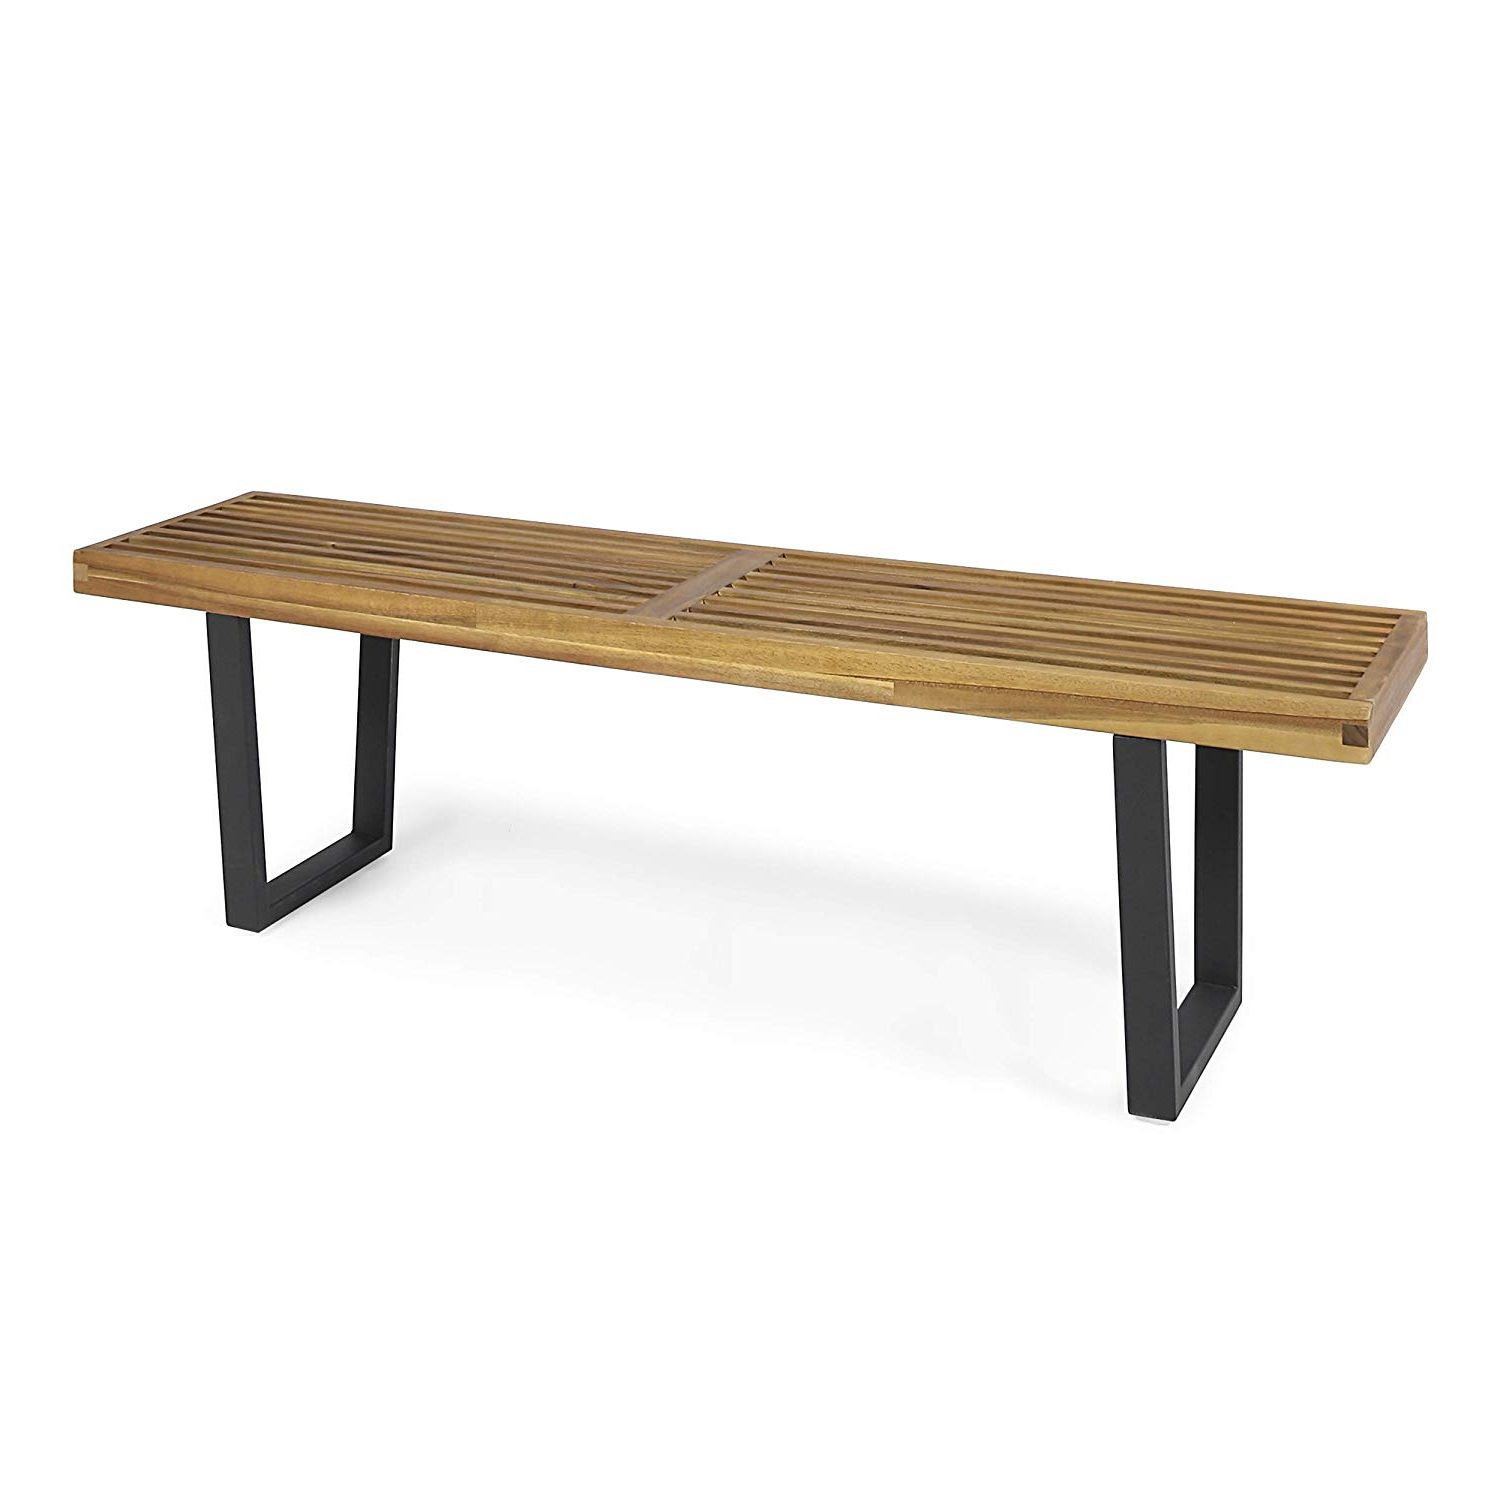 Most Recently Released Acacia Dining Tables With Black Legs With Christopher Knight Home Joa Patio Dining Bench, Acacia Wood With Iron Legs,  Modern, Contemporary, Teak Finish, Black (Photo 14 of 25)